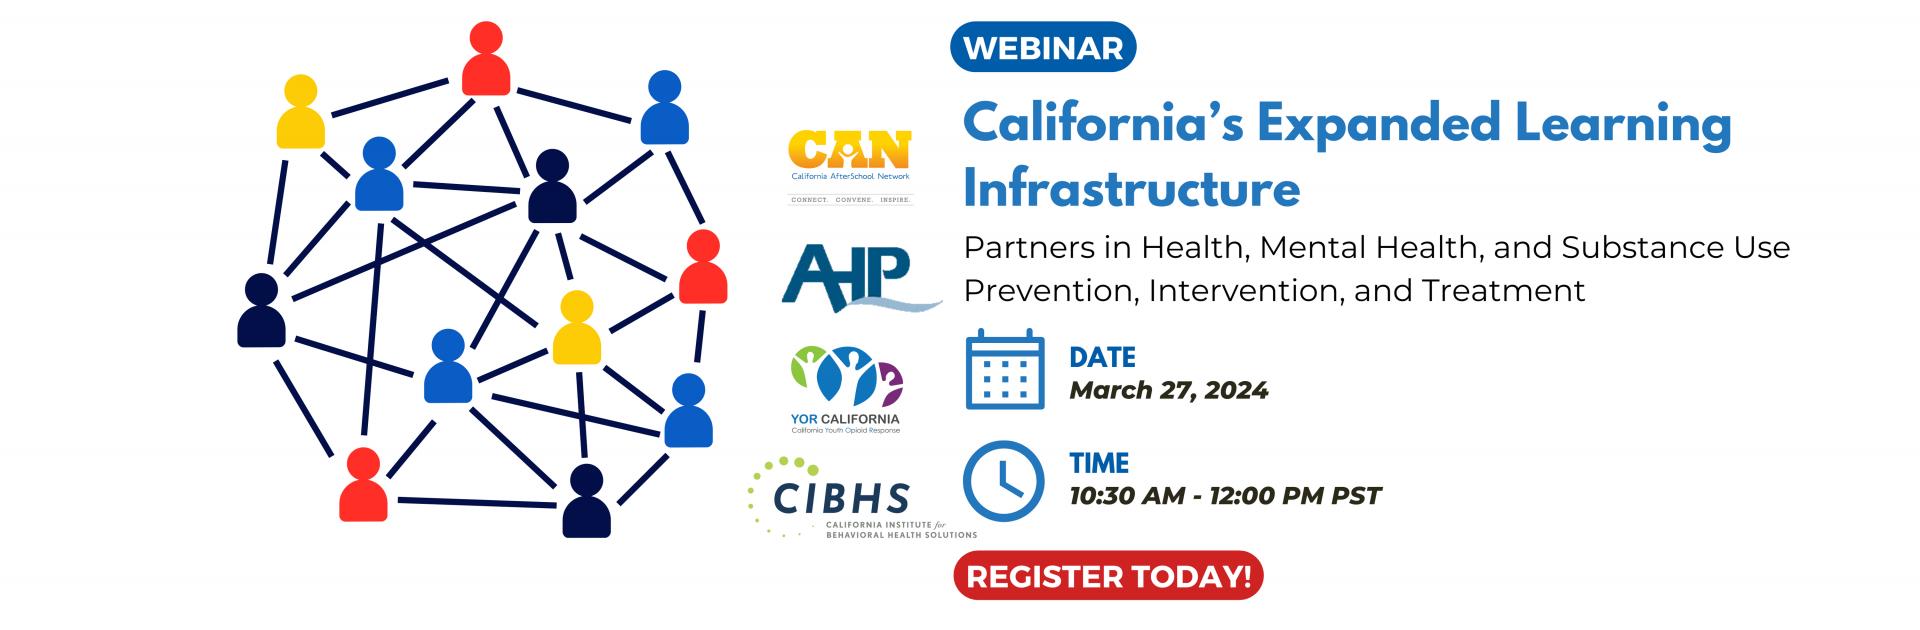 California’s Expanded Learning Infrastructure: Partners in Health, Mental Health, and Substance Use Prevention, Intervention, and Treatment Webinar March 27, 2024, 10:30 AM - 12:00 PM